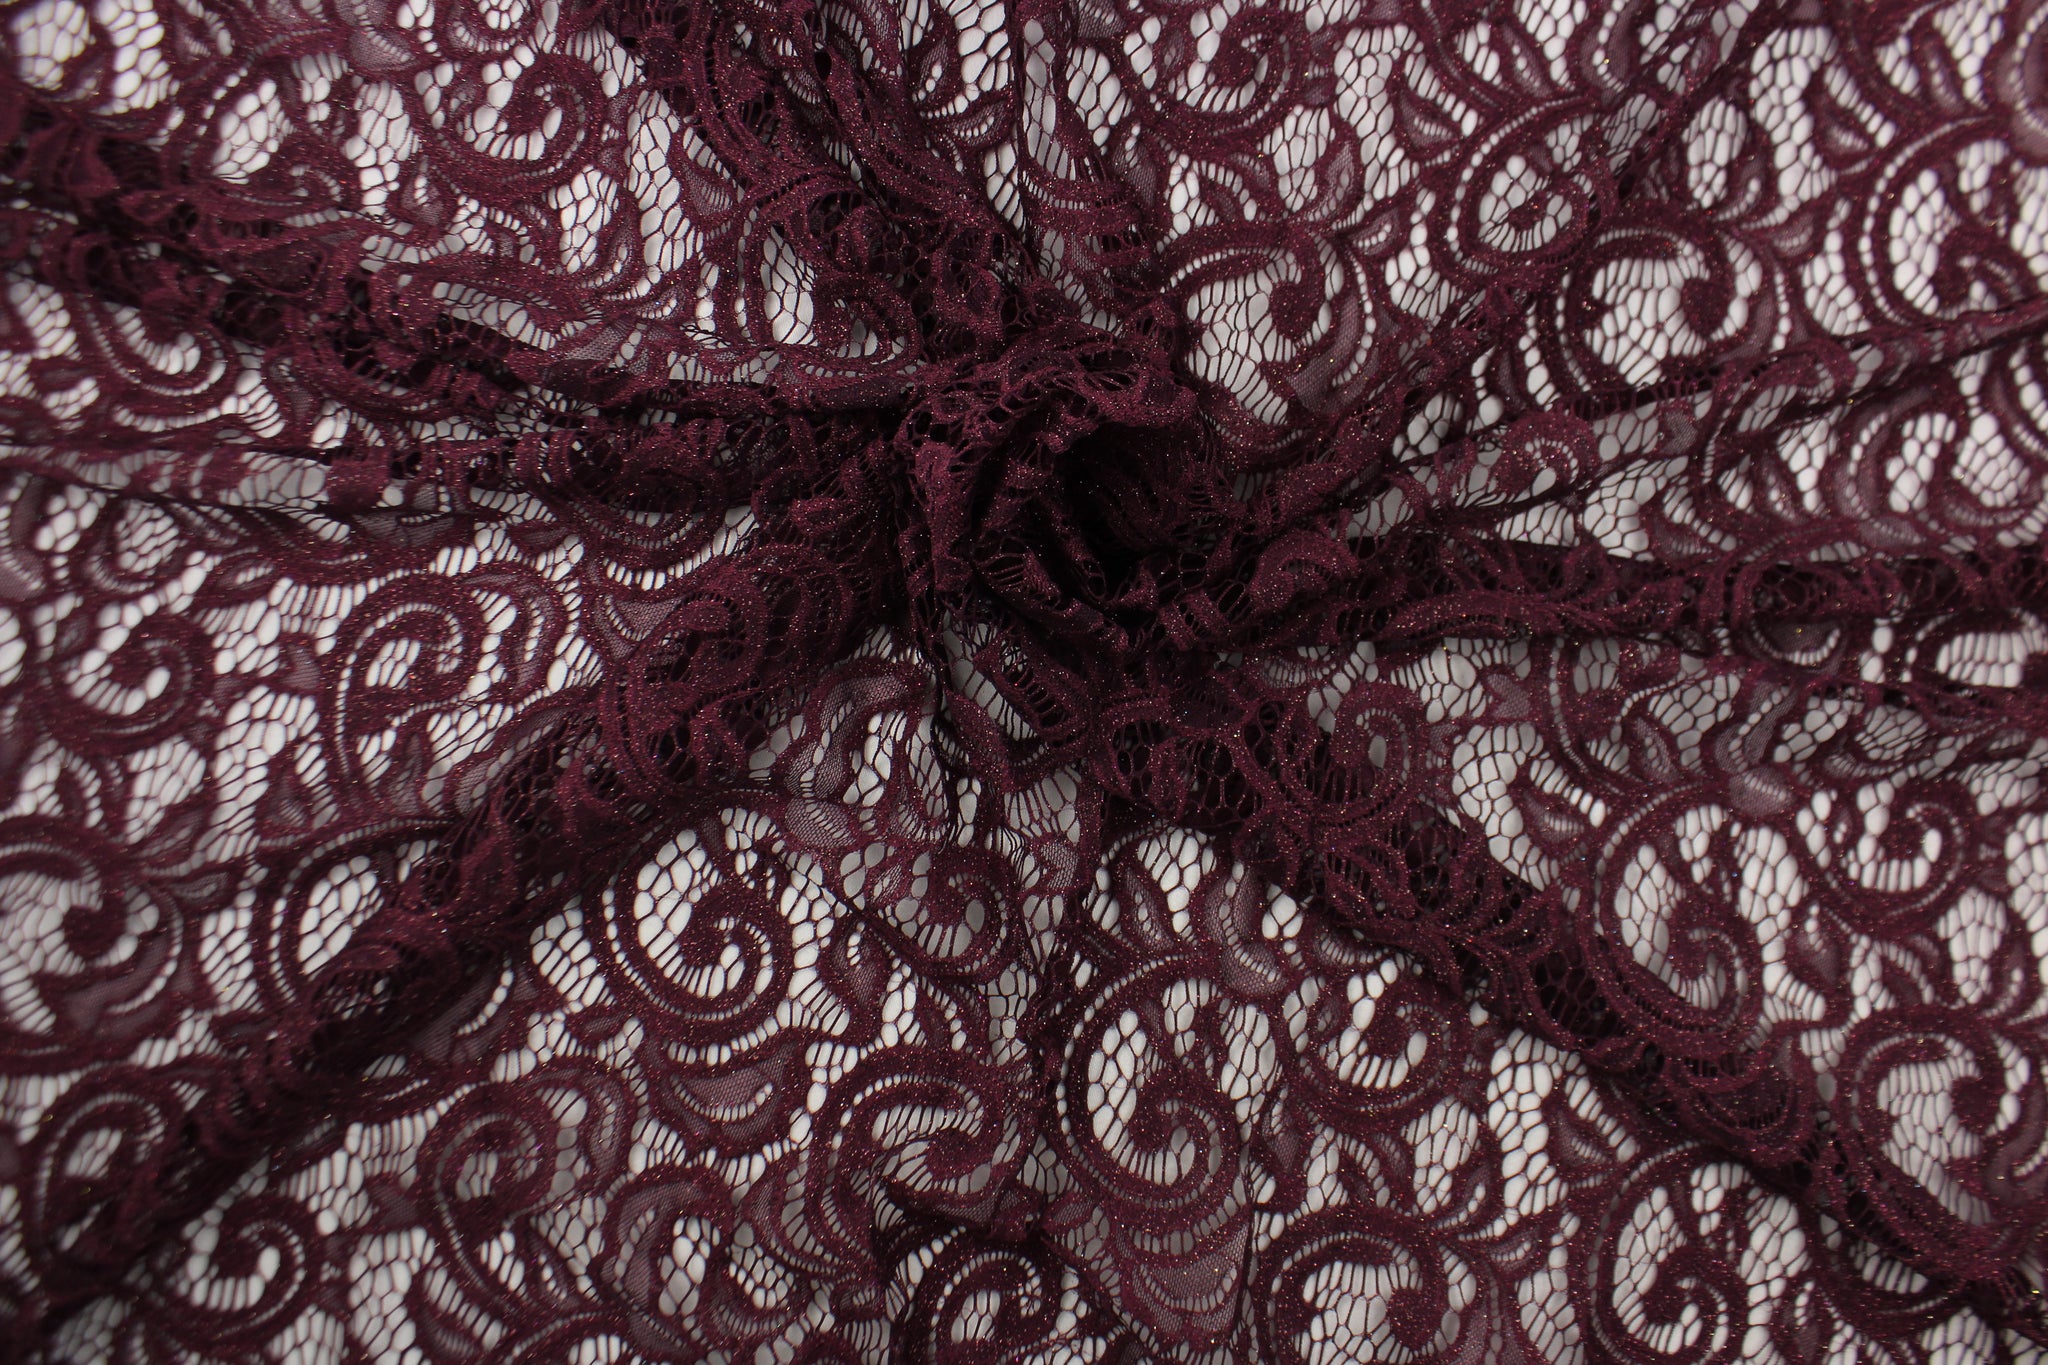 Burgundy stretch lace trimming - Lace To Love